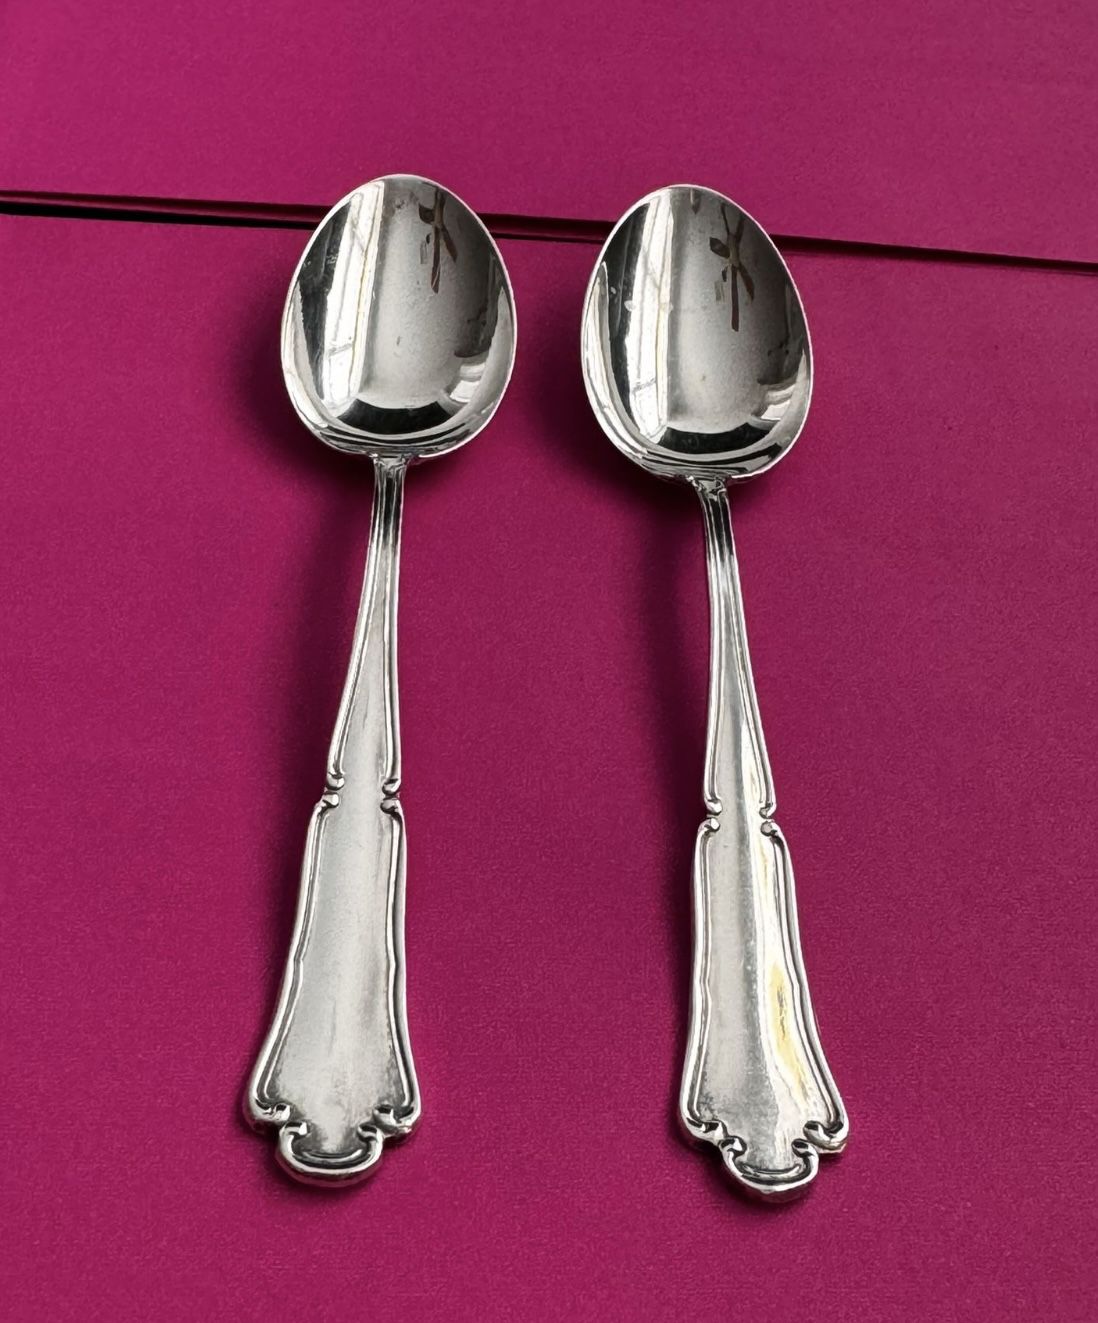 Pair of sterling silver tea spoons marked 800  Approx 4 inches each  In great condition